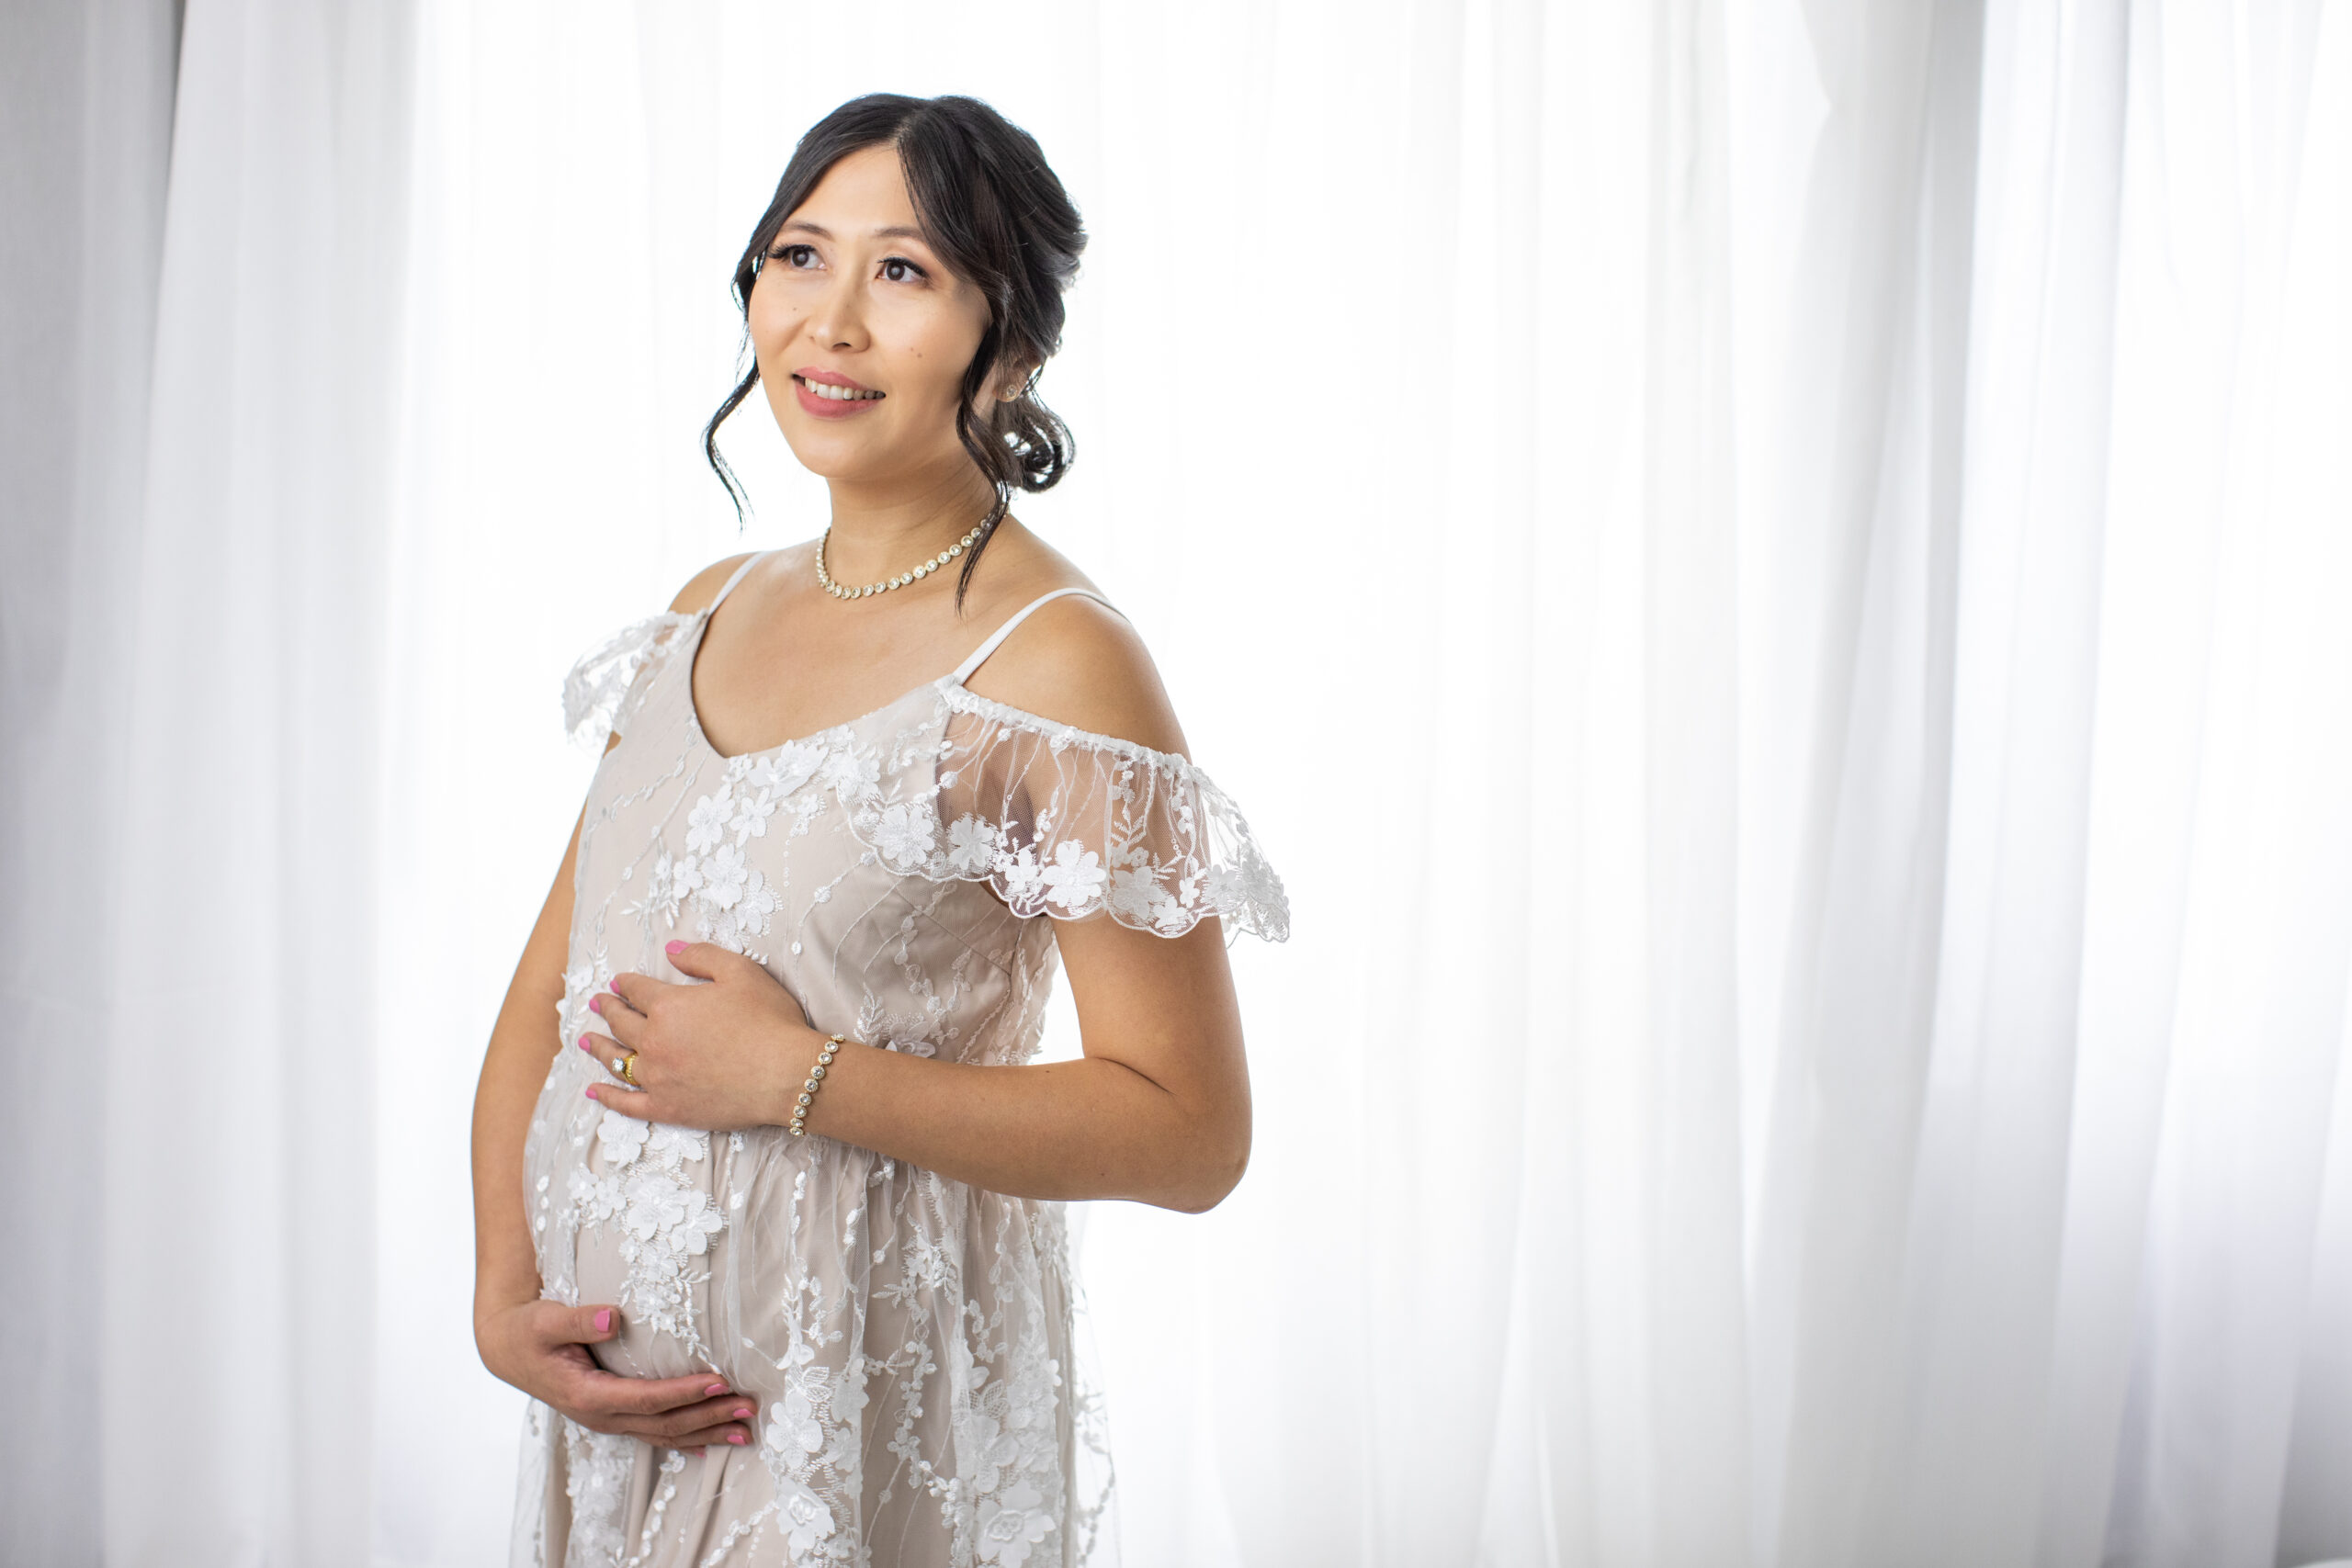 Studio maternity portrait in Pink Blush lace gown on back lit white background